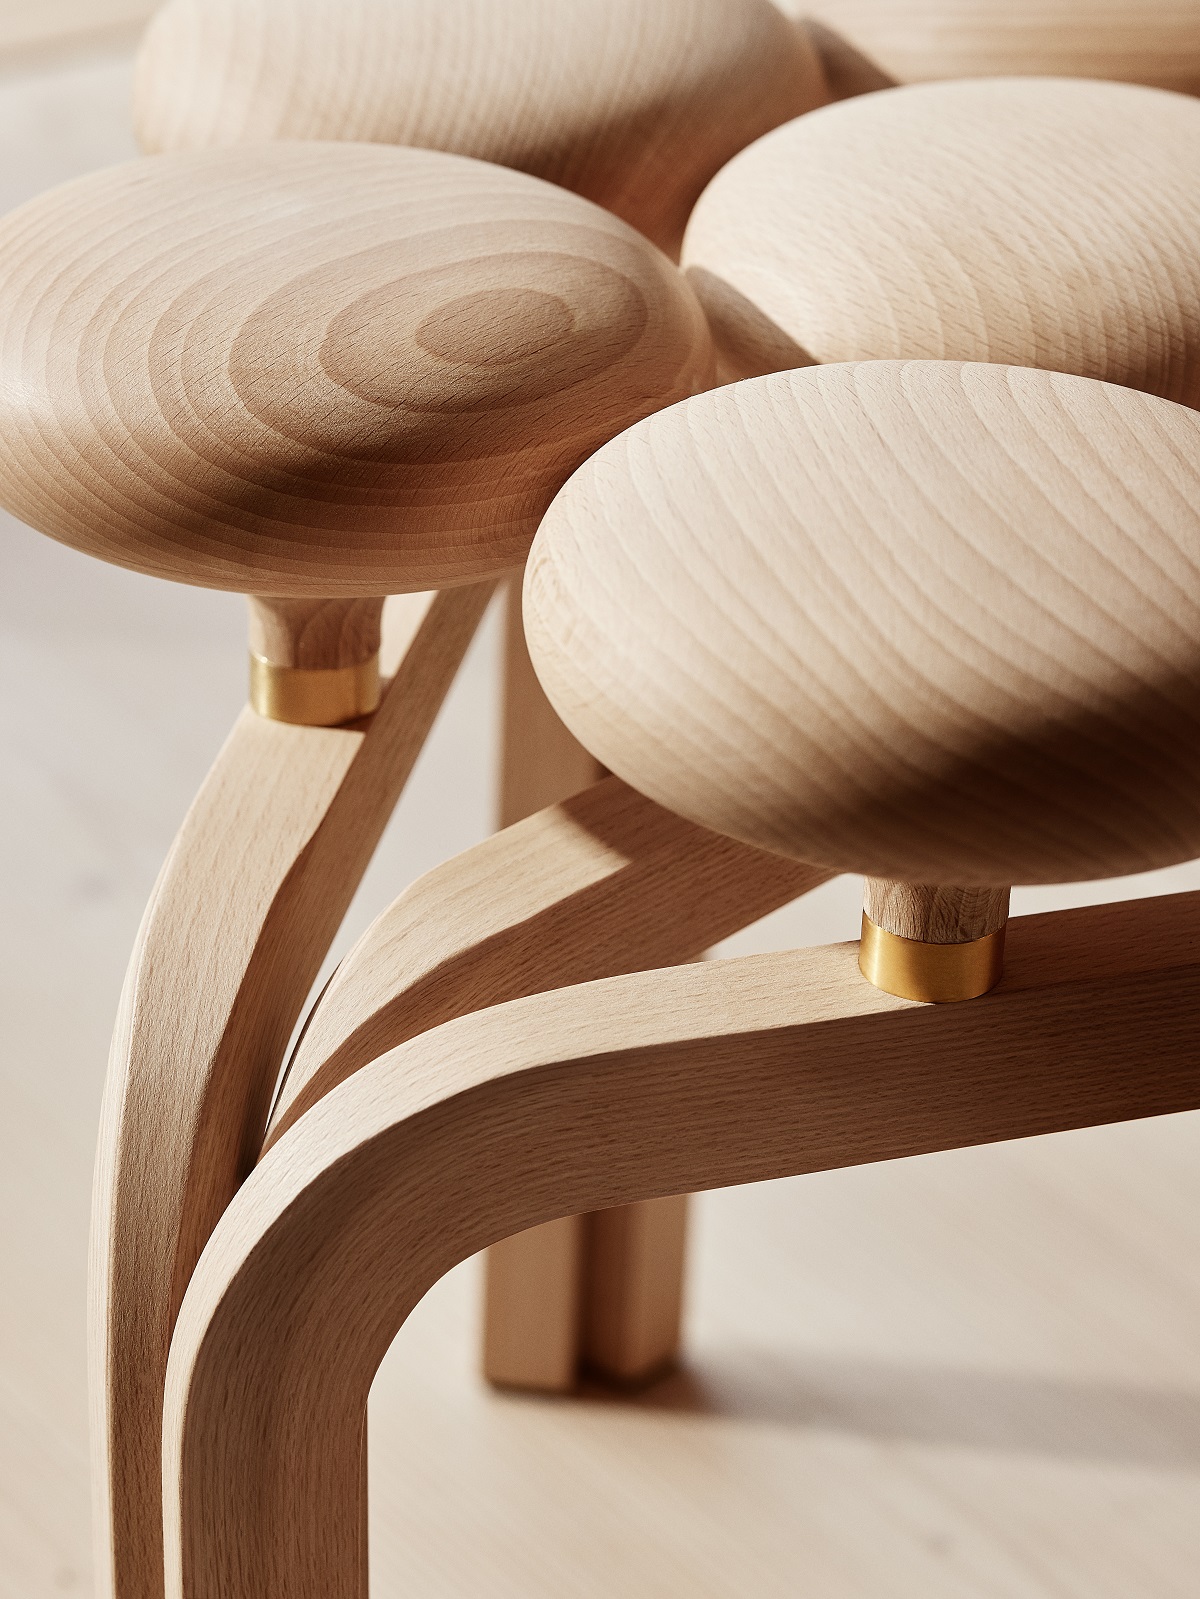 detail of wooden structure of Utzon chair from Fritz Hansen